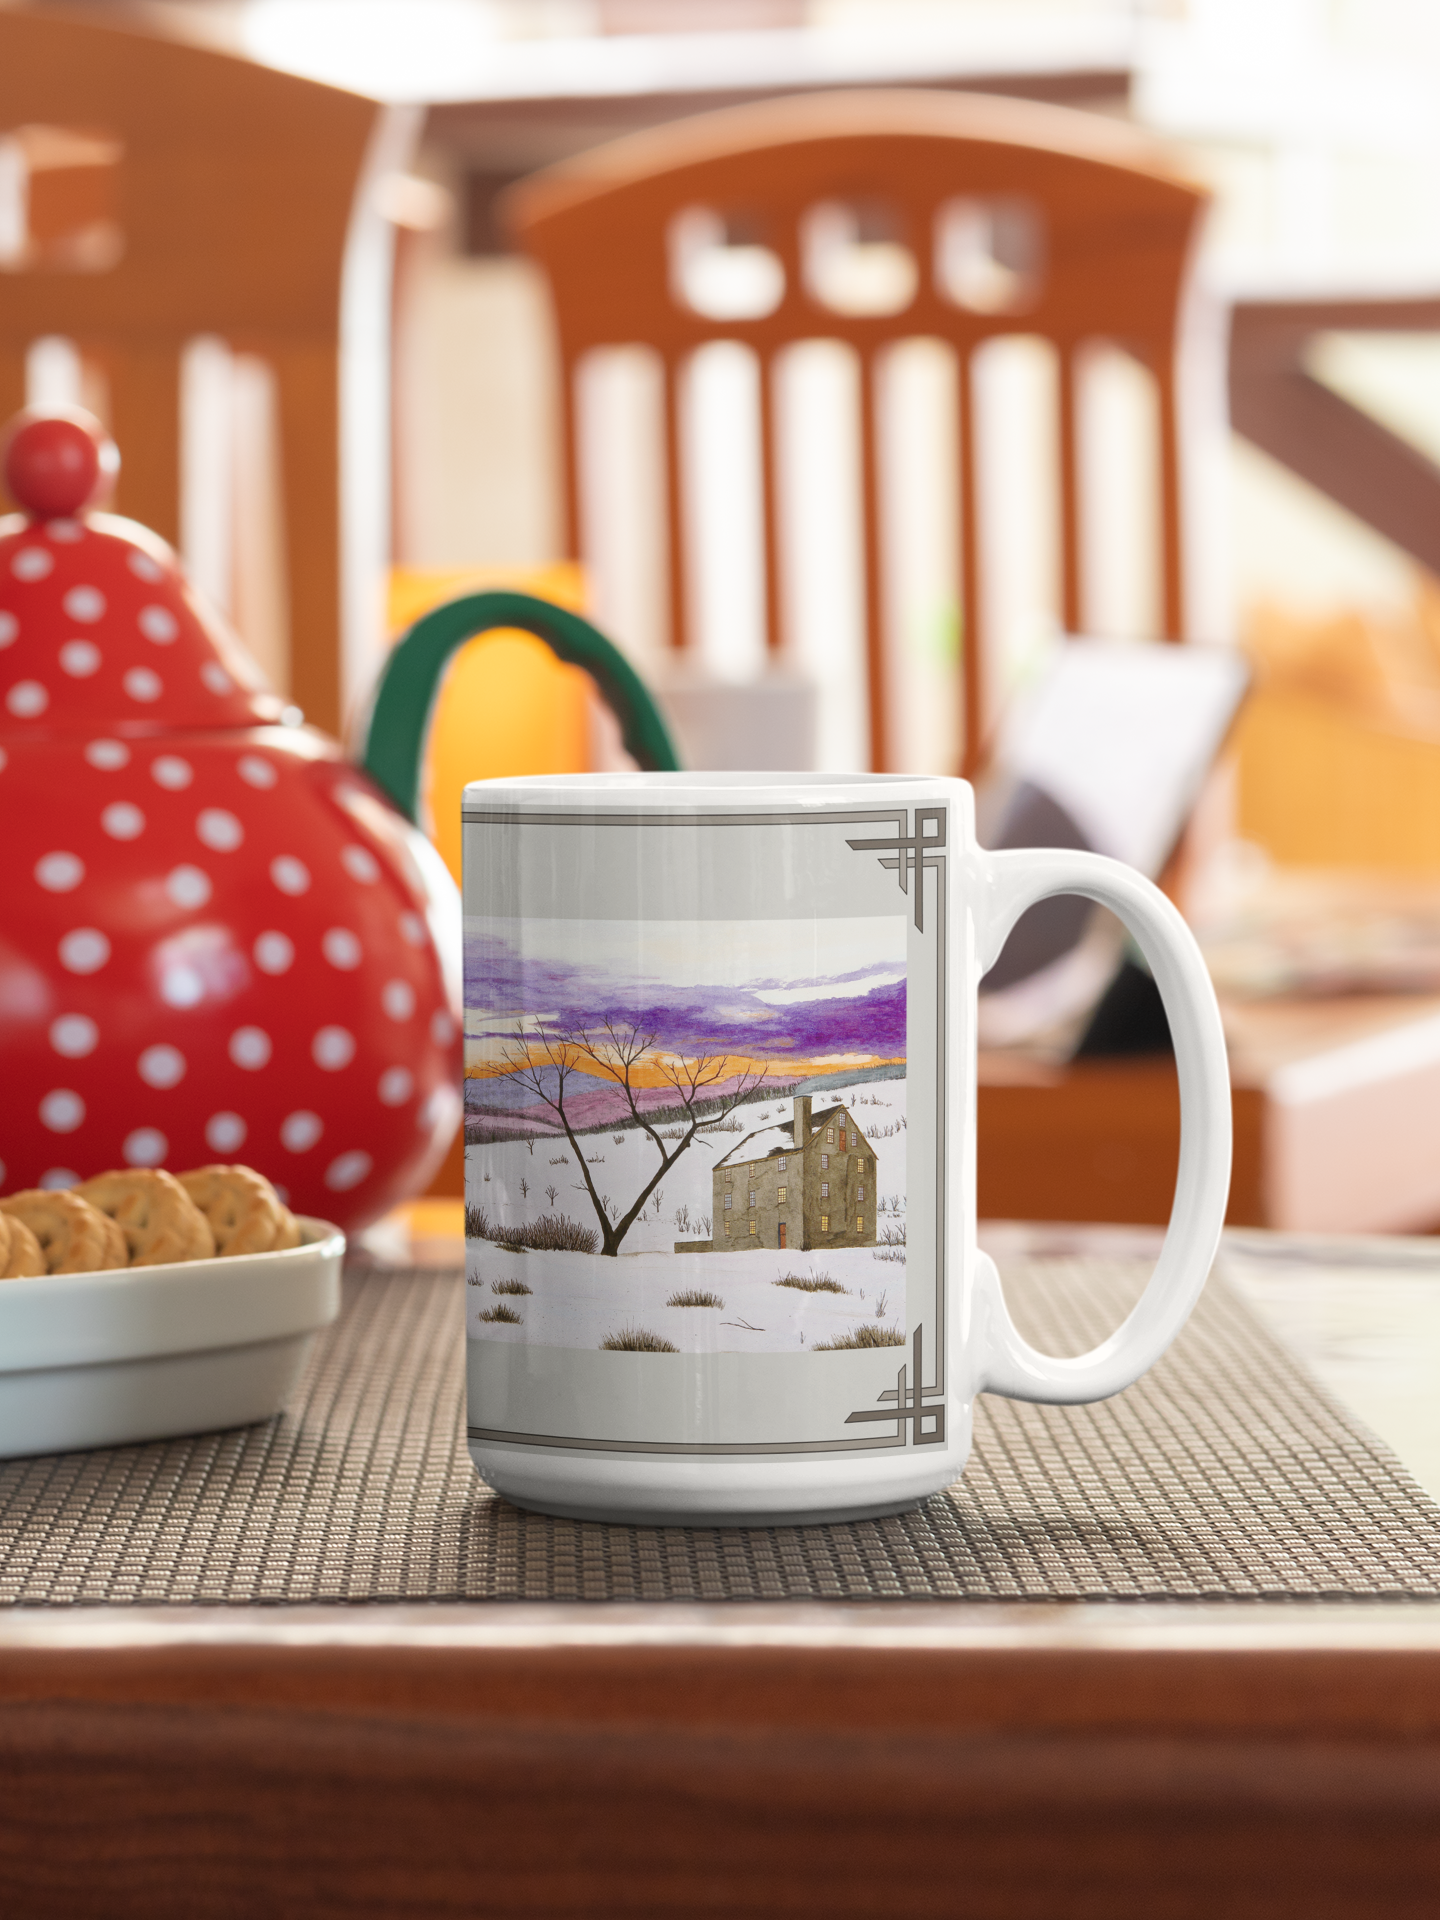 At sunset, this old farmhouse beckons us to come in from the snow and enjoy a mug of hot coffee, tea, or hot chocolate. In Winter, you'll appreciate being inside with your favorite hot beverage in this mug, and on a hot Sumer day, this charming snow scene will be a refreshing sight!      The mug design is a reproduction of an original watercolor by Lee M. Buchanan and has the image on the front and back of the mug.